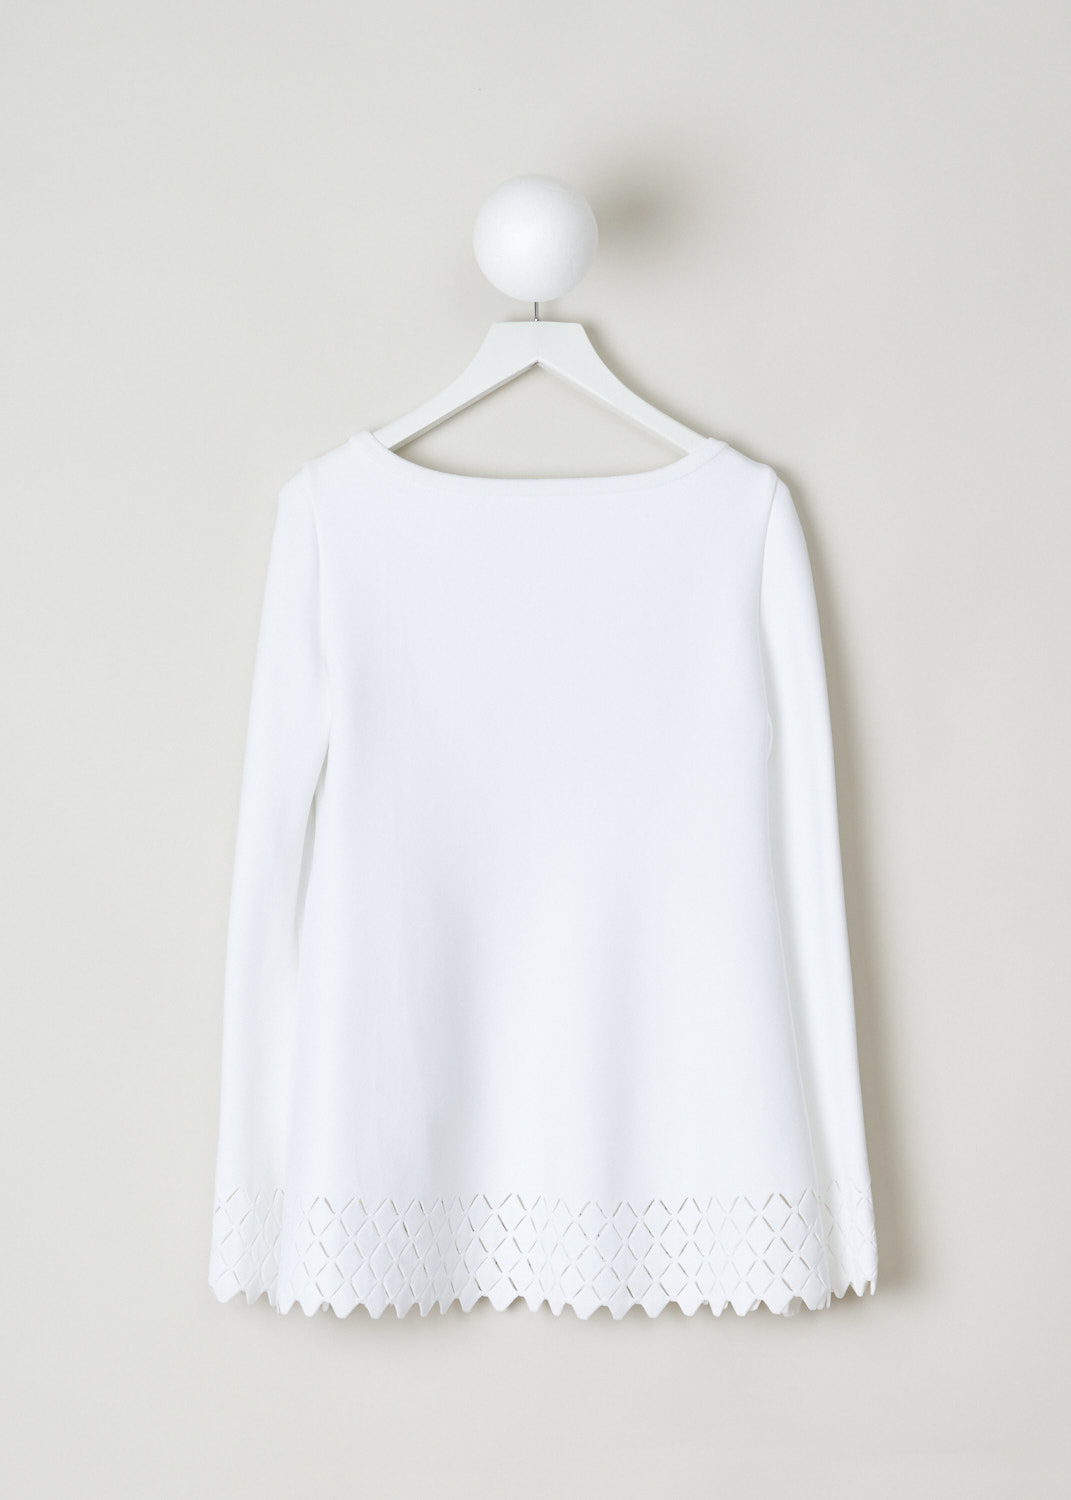 Alaïa, White A-line top with diamond detailing, 8S9UE80LM381_C000, White, Back, White A-line top with a boat neckline. The heavy duty fabric feels sturdy but also stretchy. The cuffs of the long sleeves are adorned with a diamond see-through laser cut hemline. That same hemline can be found across the bottom of the top.